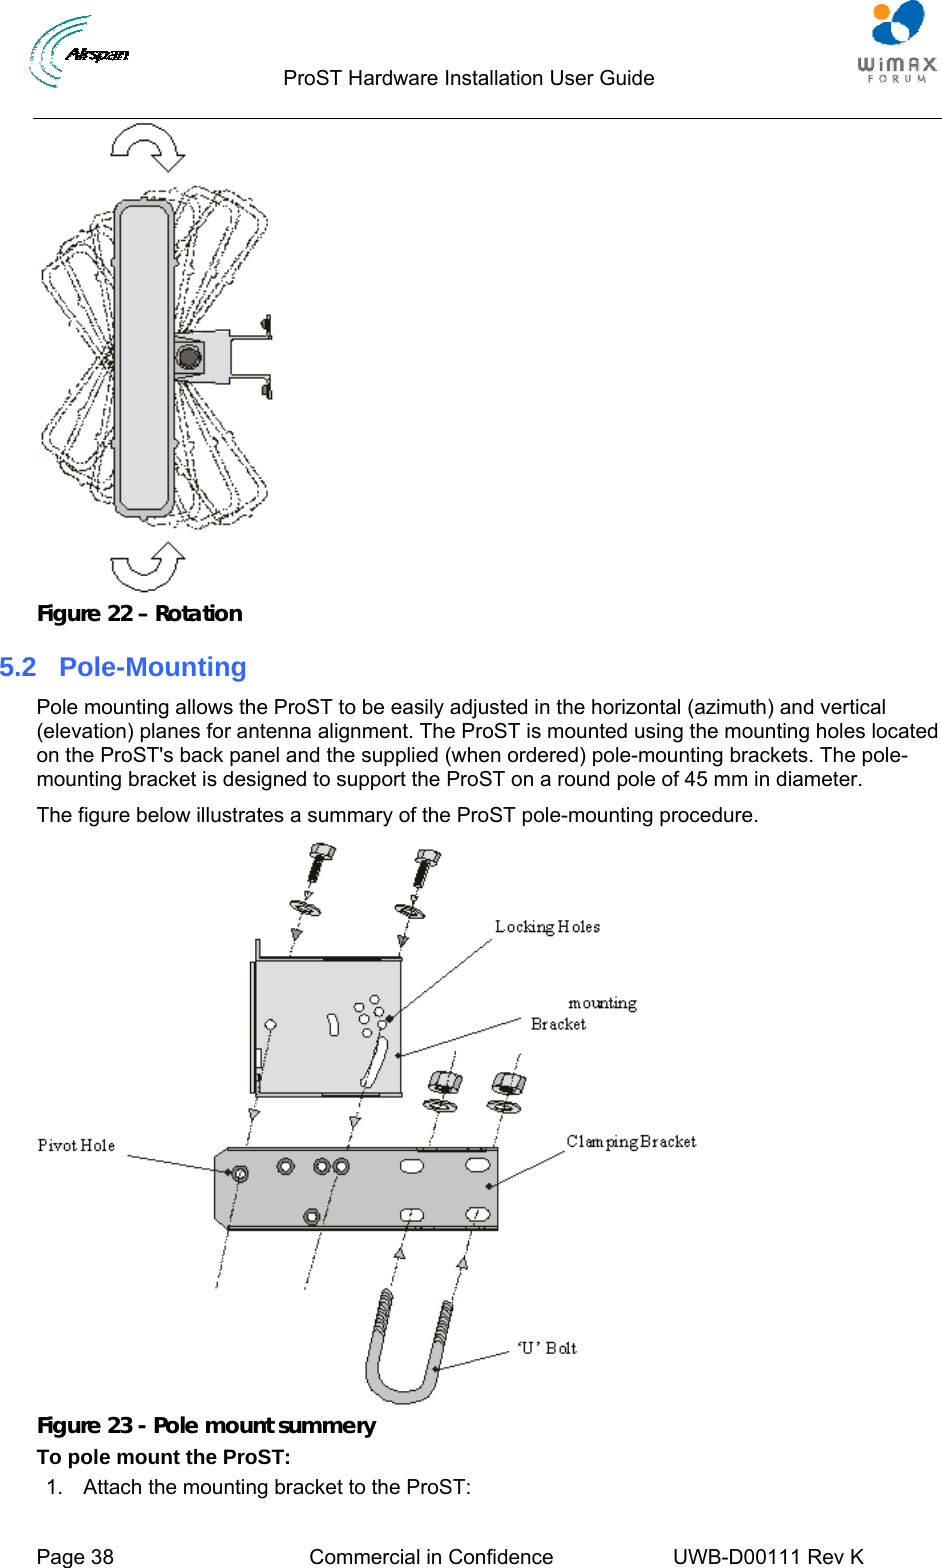                                  ProST Hardware Installation User Guide     Page 38  Commercial in Confidence  UWB-D00111 Rev K    Figure 22 – Rotation 5.2  Pole-Mounting Pole mounting allows the ProST to be easily adjusted in the horizontal (azimuth) and vertical (elevation) planes for antenna alignment. The ProST is mounted using the mounting holes located on the ProST&apos;s back panel and the supplied (when ordered) pole-mounting brackets. The pole-mounting bracket is designed to support the ProST on a round pole of 45 mm in diameter. The figure below illustrates a summary of the ProST pole-mounting procedure.  Figure 23 - Pole mount summery To pole mount the ProST: 1.  Attach the mounting bracket to the ProST: 